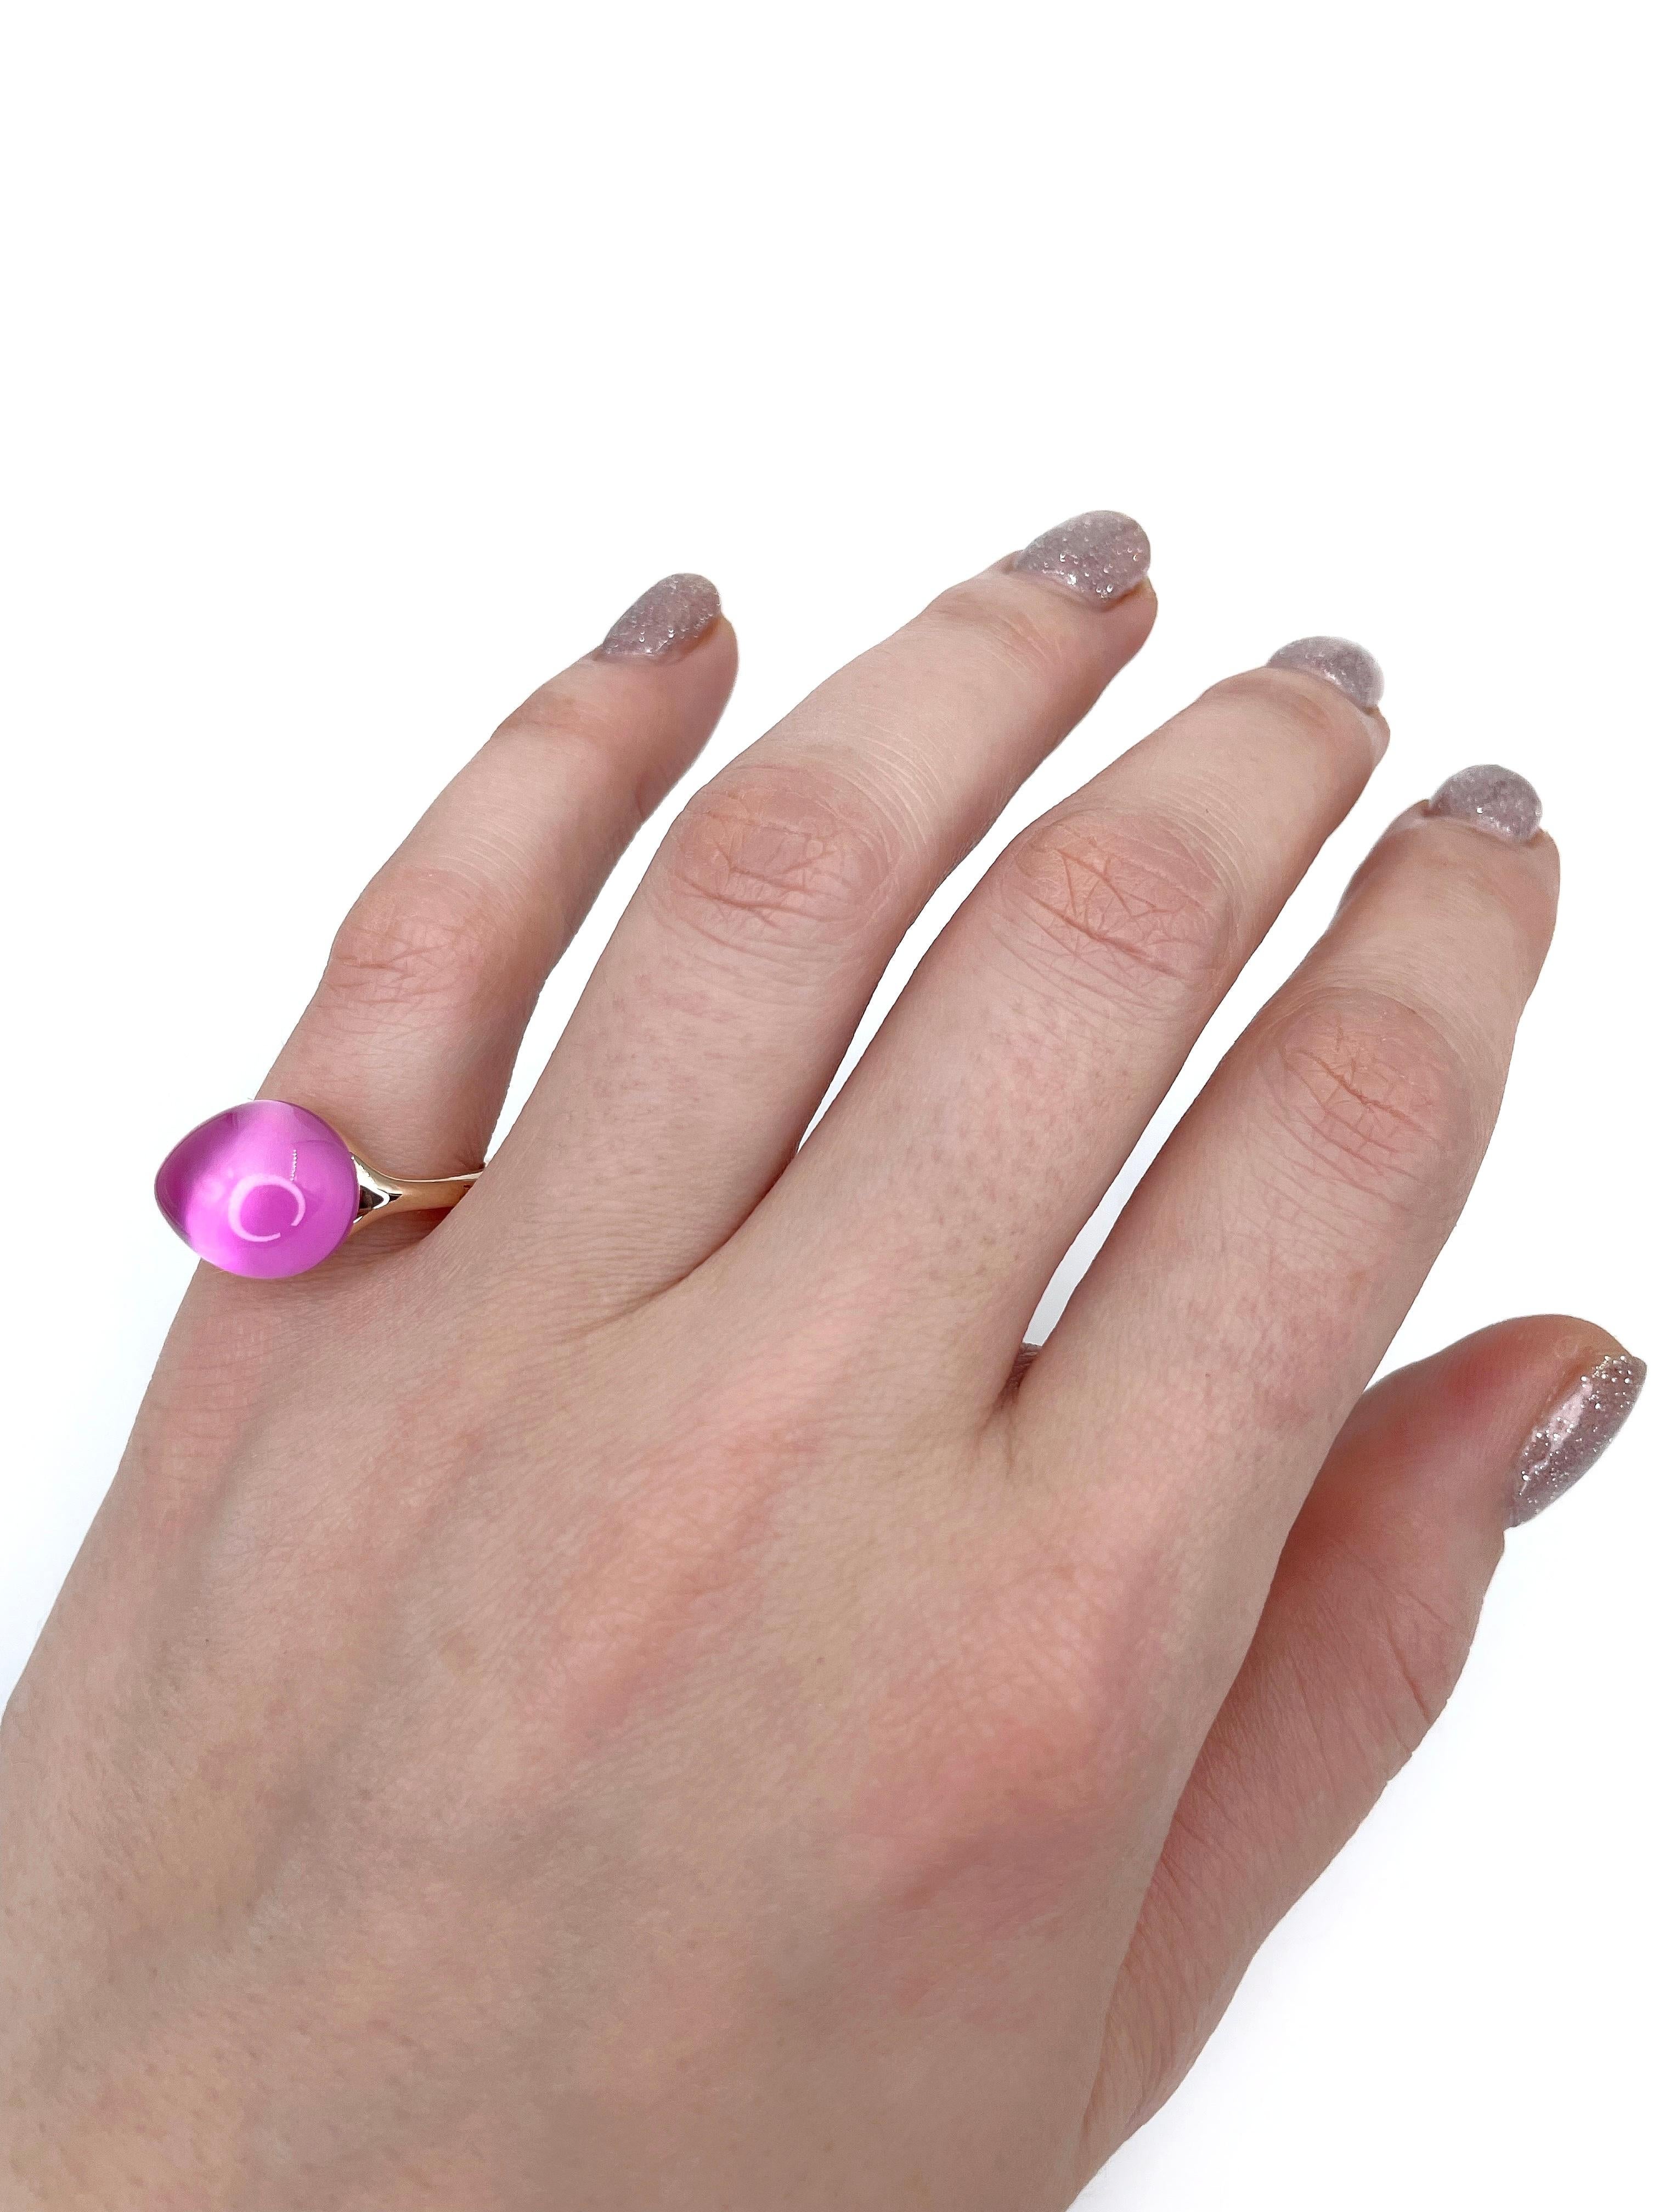 Modern Pomellato “Rouge Passion” 9 Karat Gold Pink Cabochon Cut Sapphire Cocktail Ring